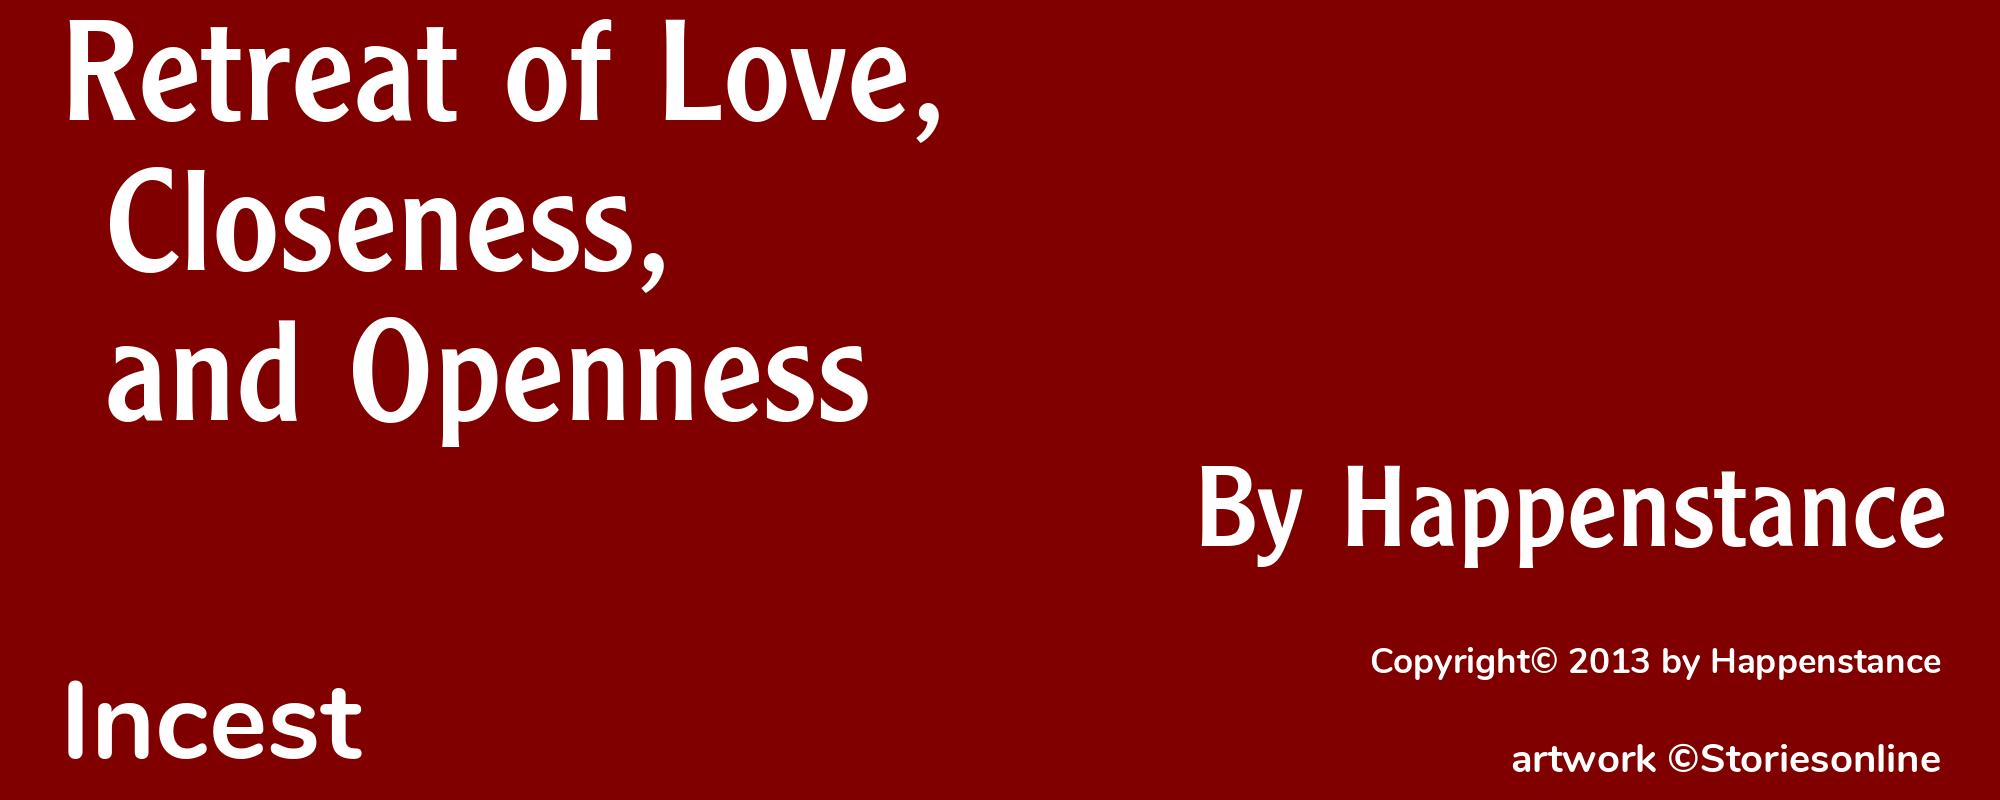 Retreat of Love, Closeness, and Openness - Cover